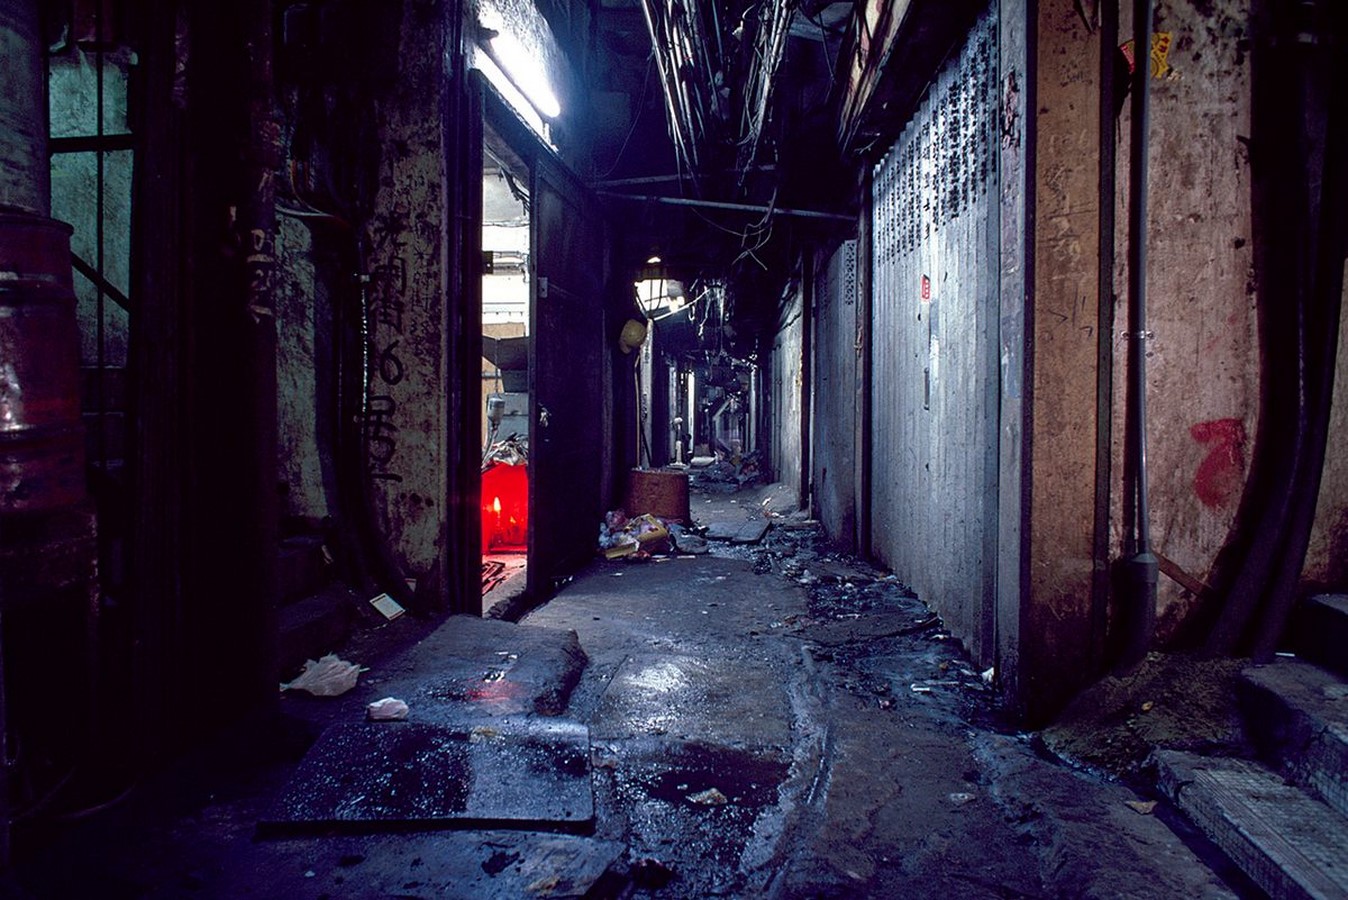 Lost in time: Kowloon walled city - Sheet3